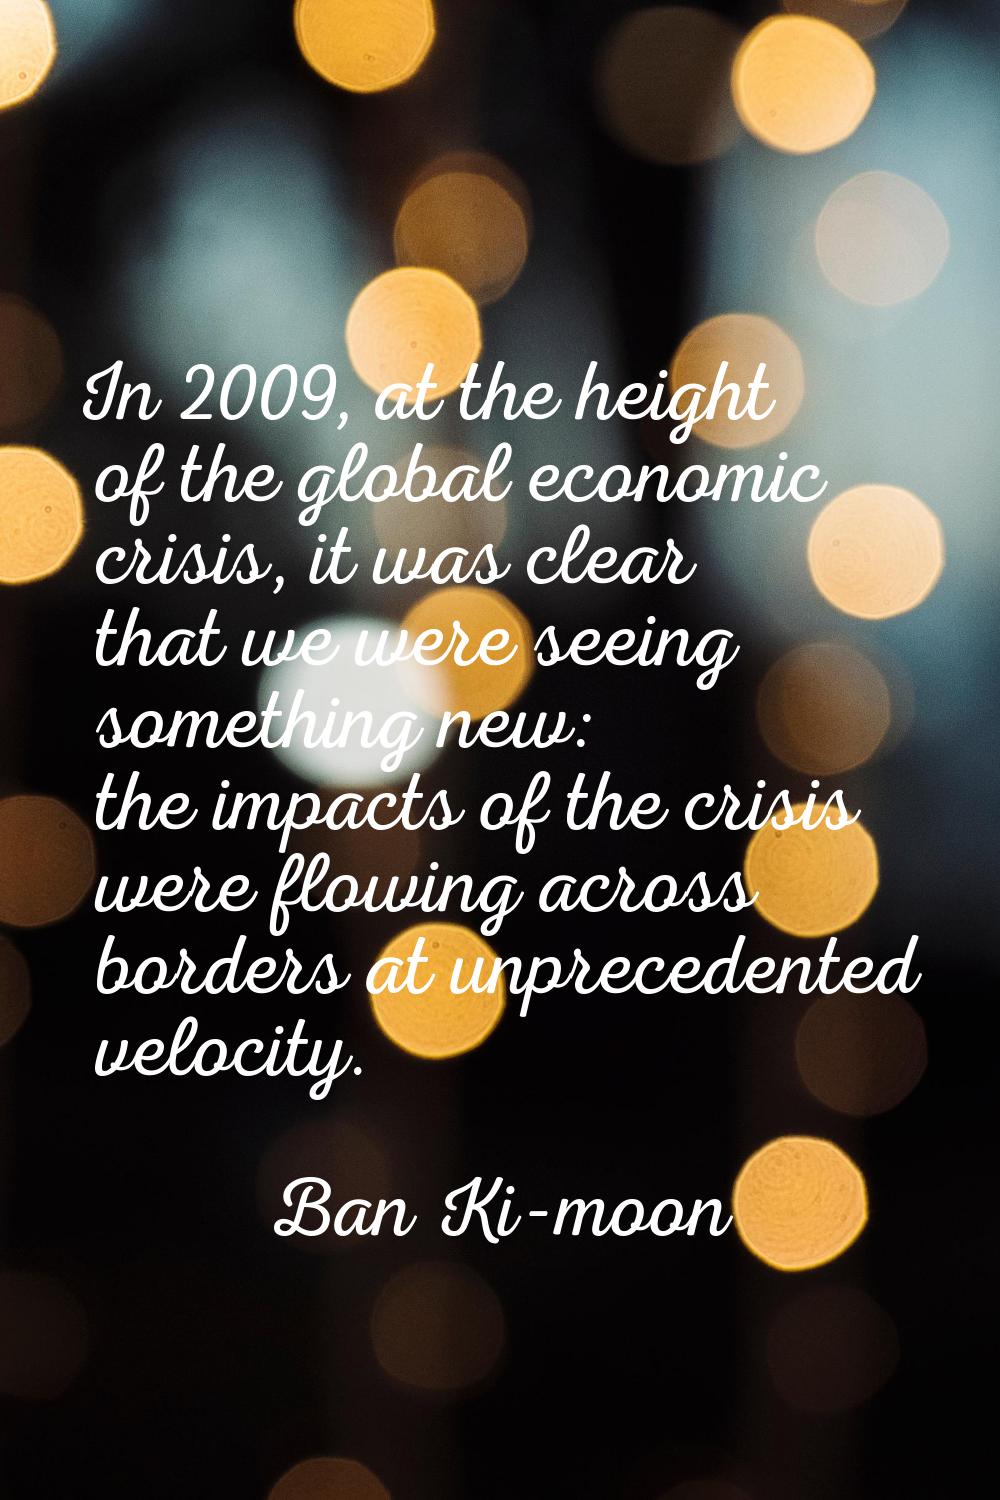 In 2009, at the height of the global economic crisis, it was clear that we were seeing something ne